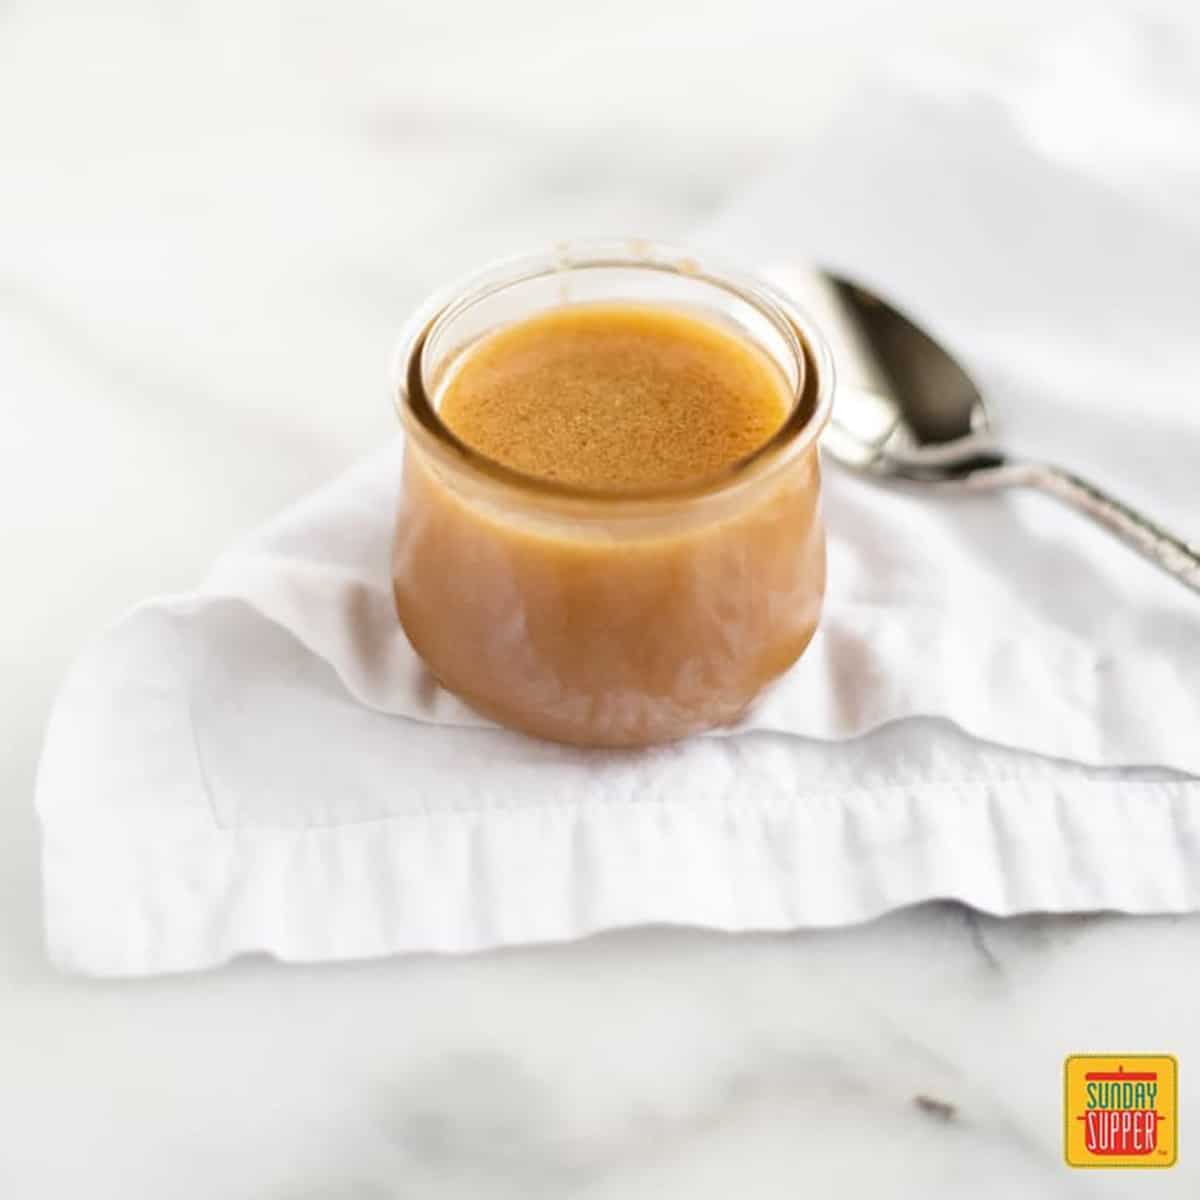 Butterscotch sauce recipe in a jar with a spoon on a white towel